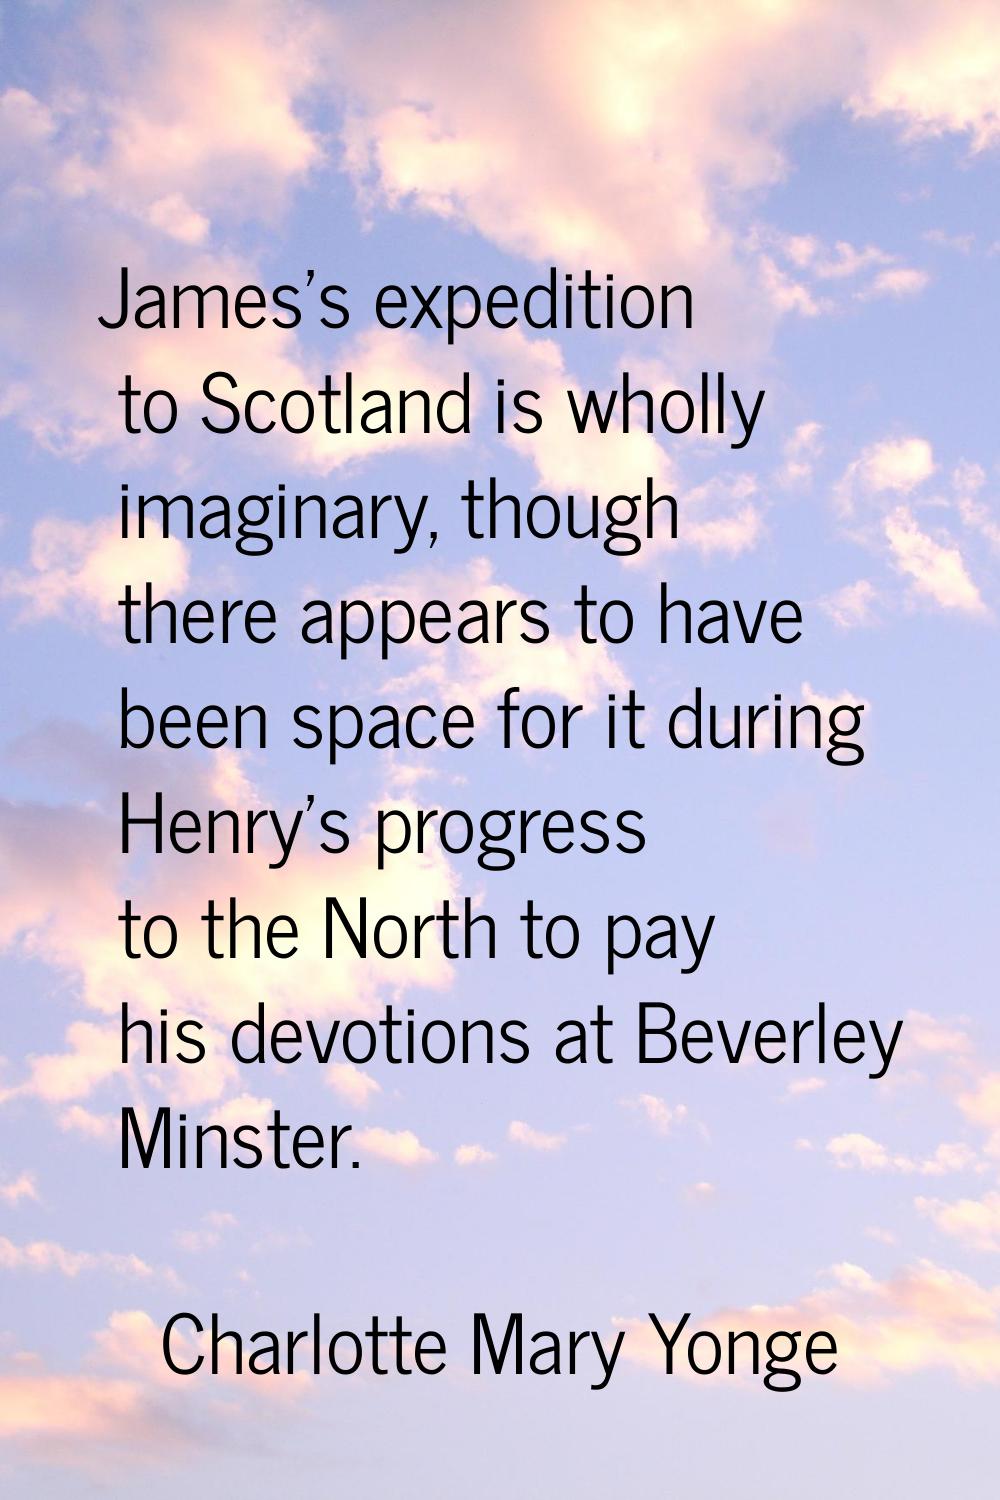 James's expedition to Scotland is wholly imaginary, though there appears to have been space for it 